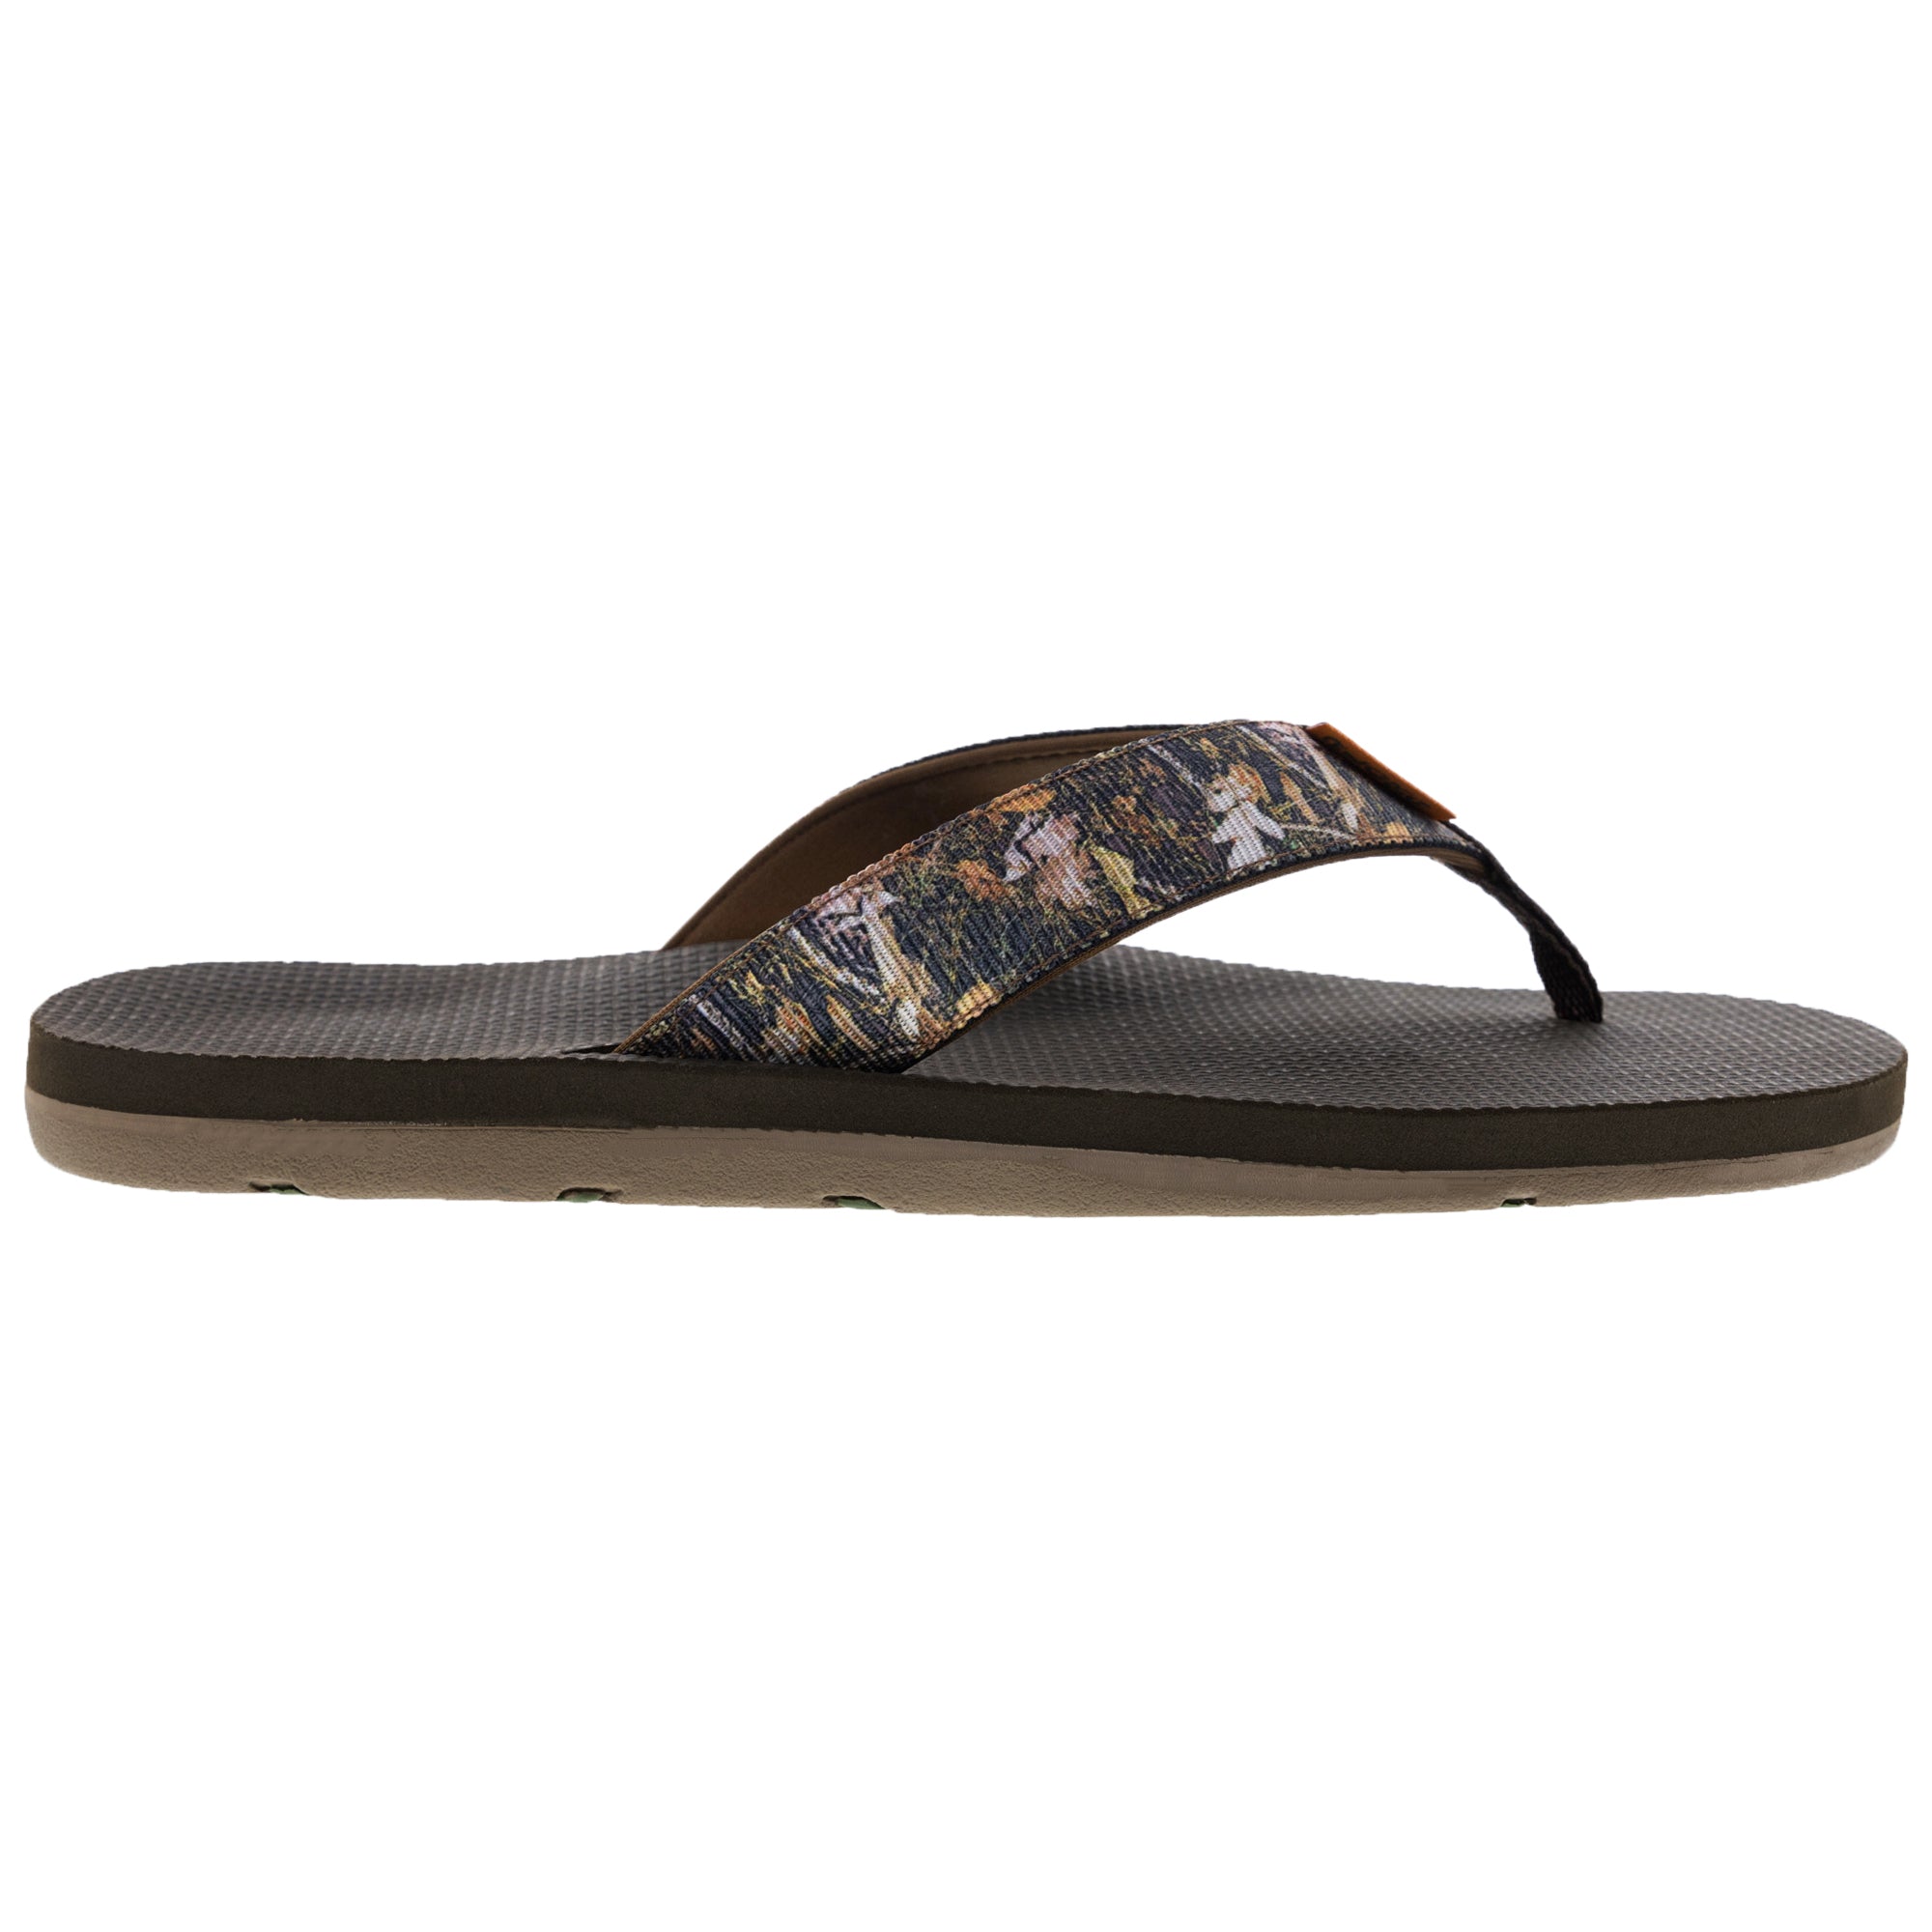 KAIKANE 4125 | Men's Molded Sole Slipper | Flip Flop With Arch Support ...